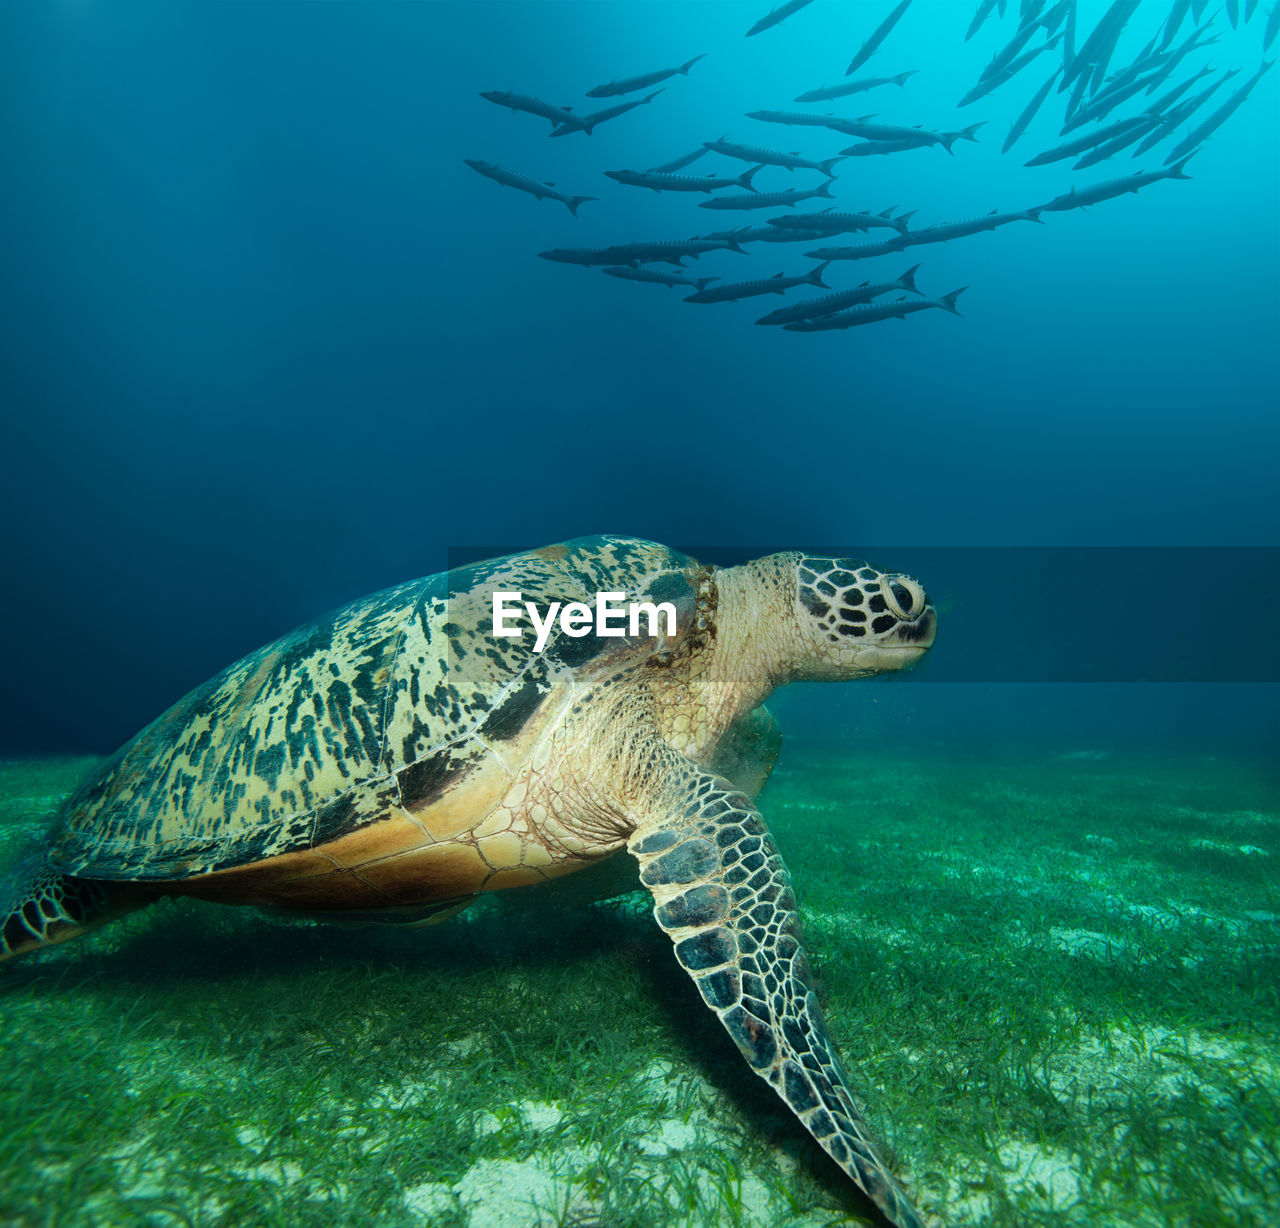 TURTLE SWIMMING IN SEA AGAINST BLUE SKY